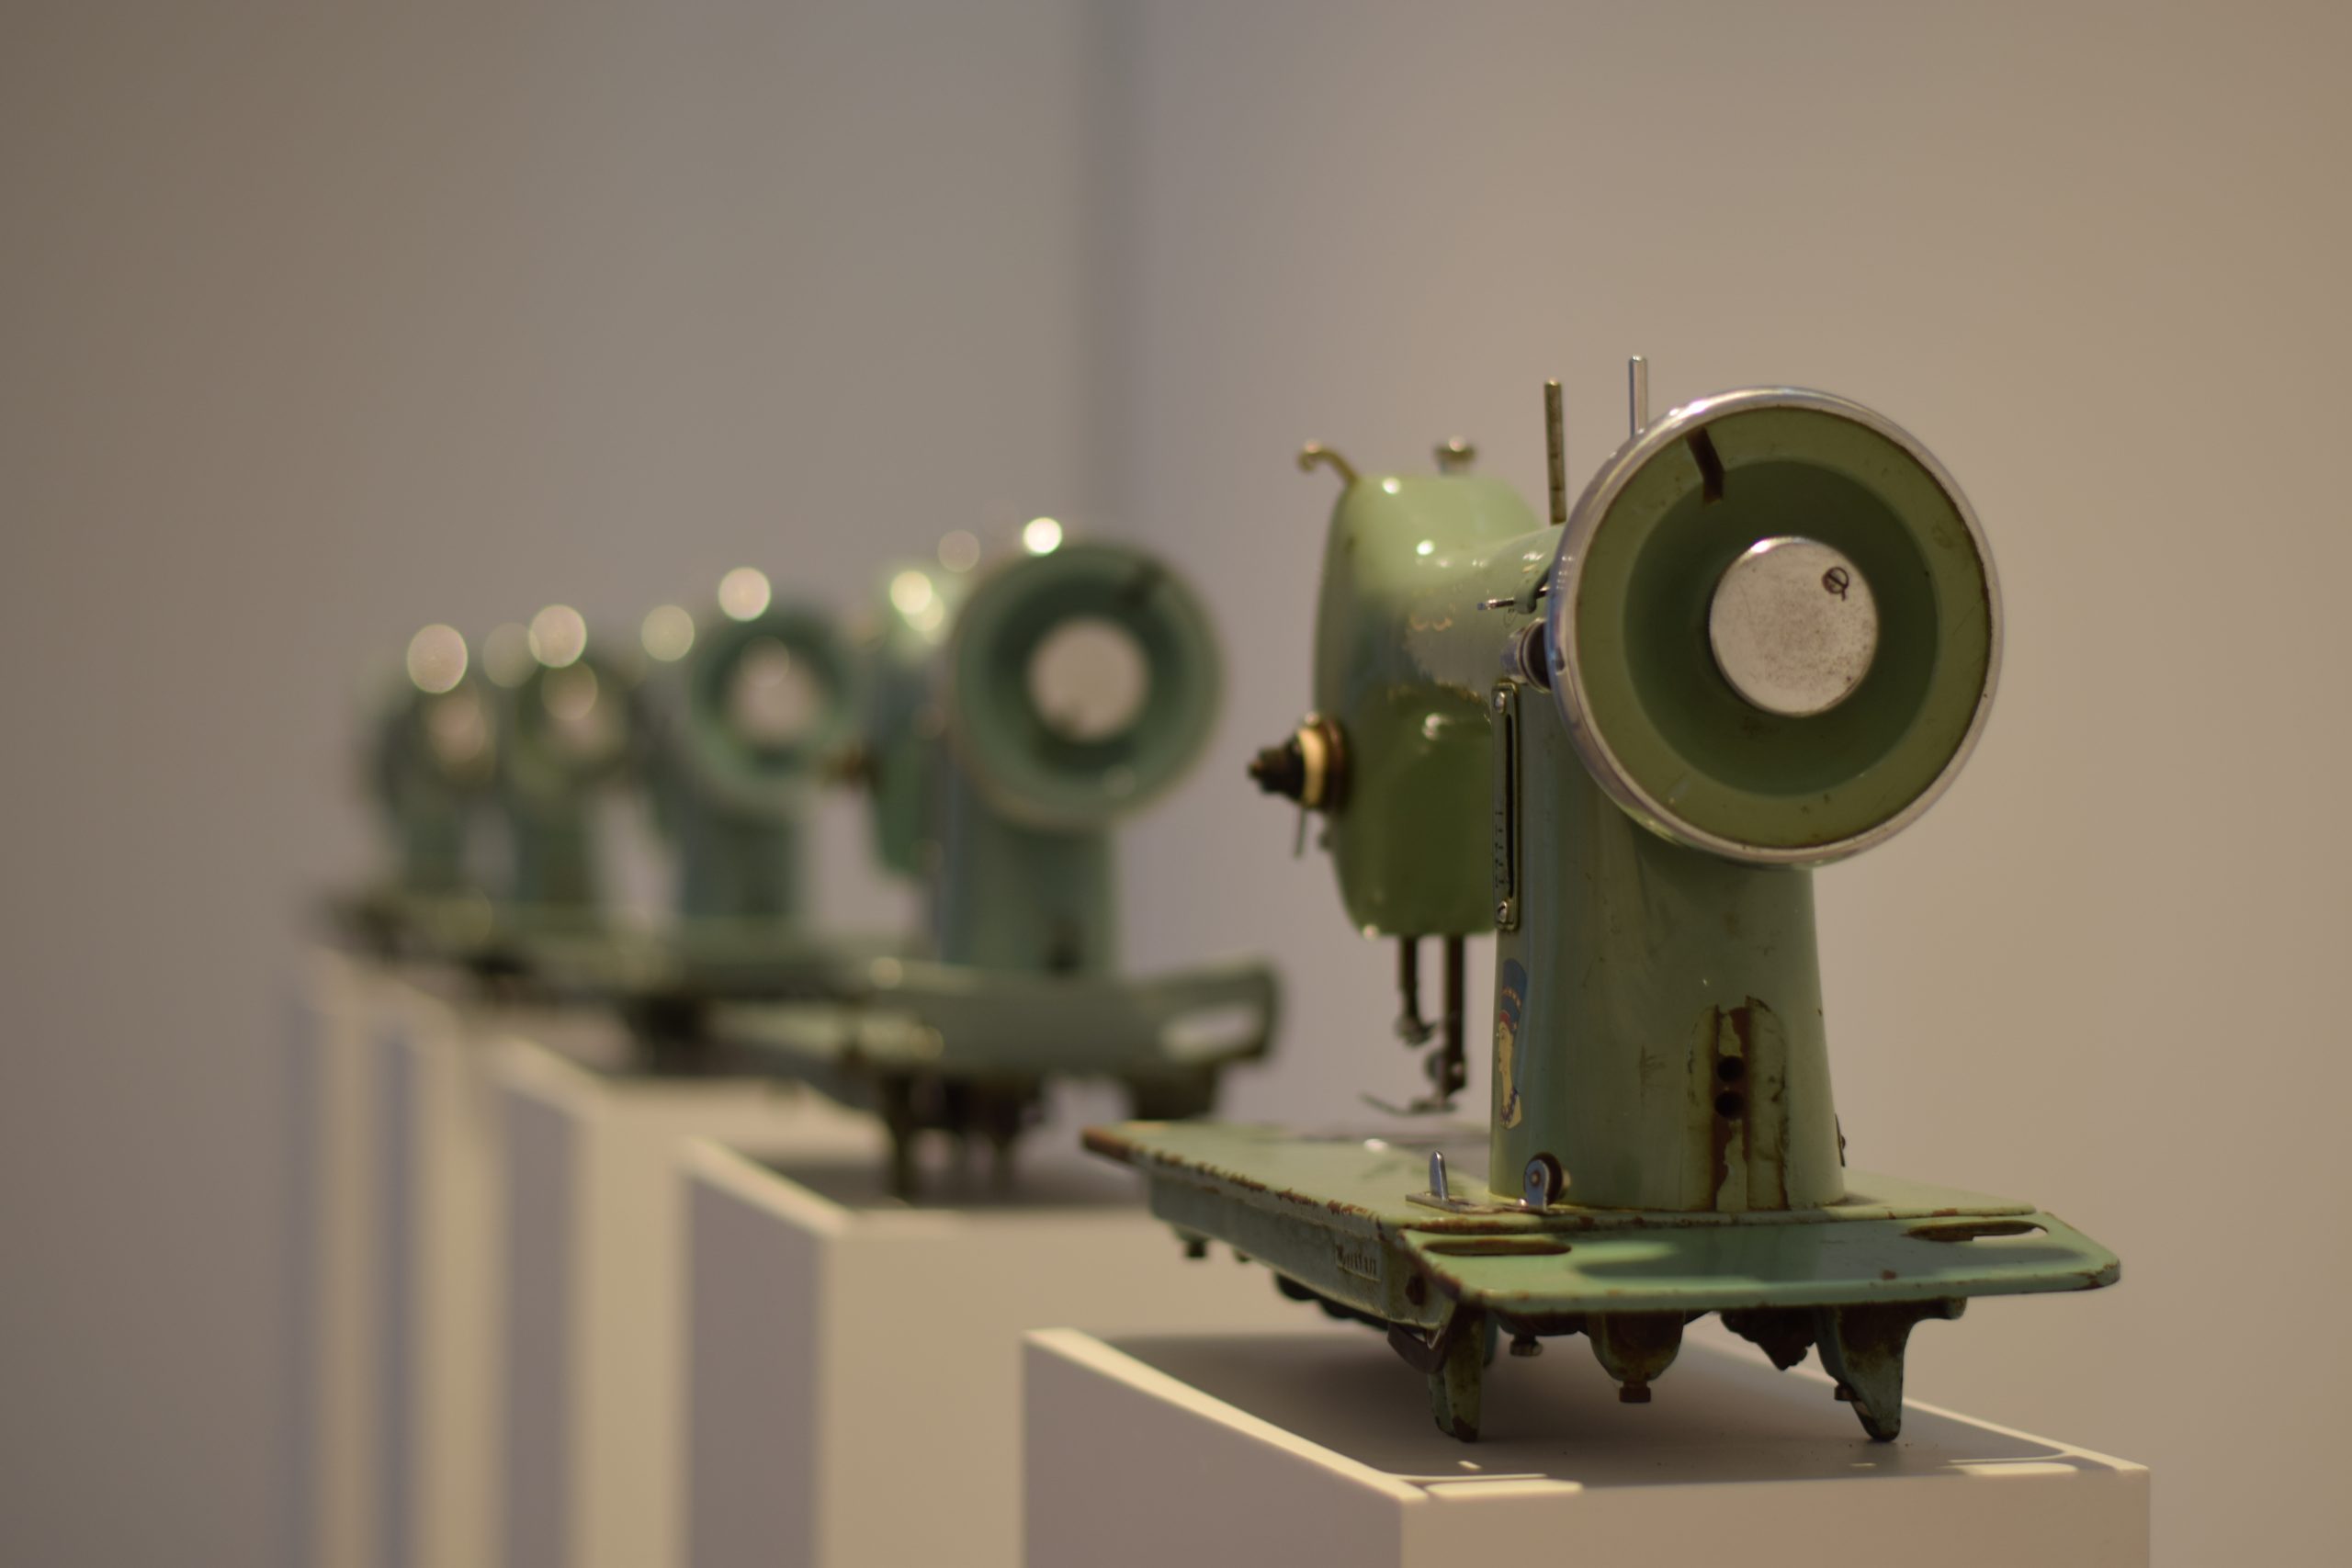 Sewing machines in a line